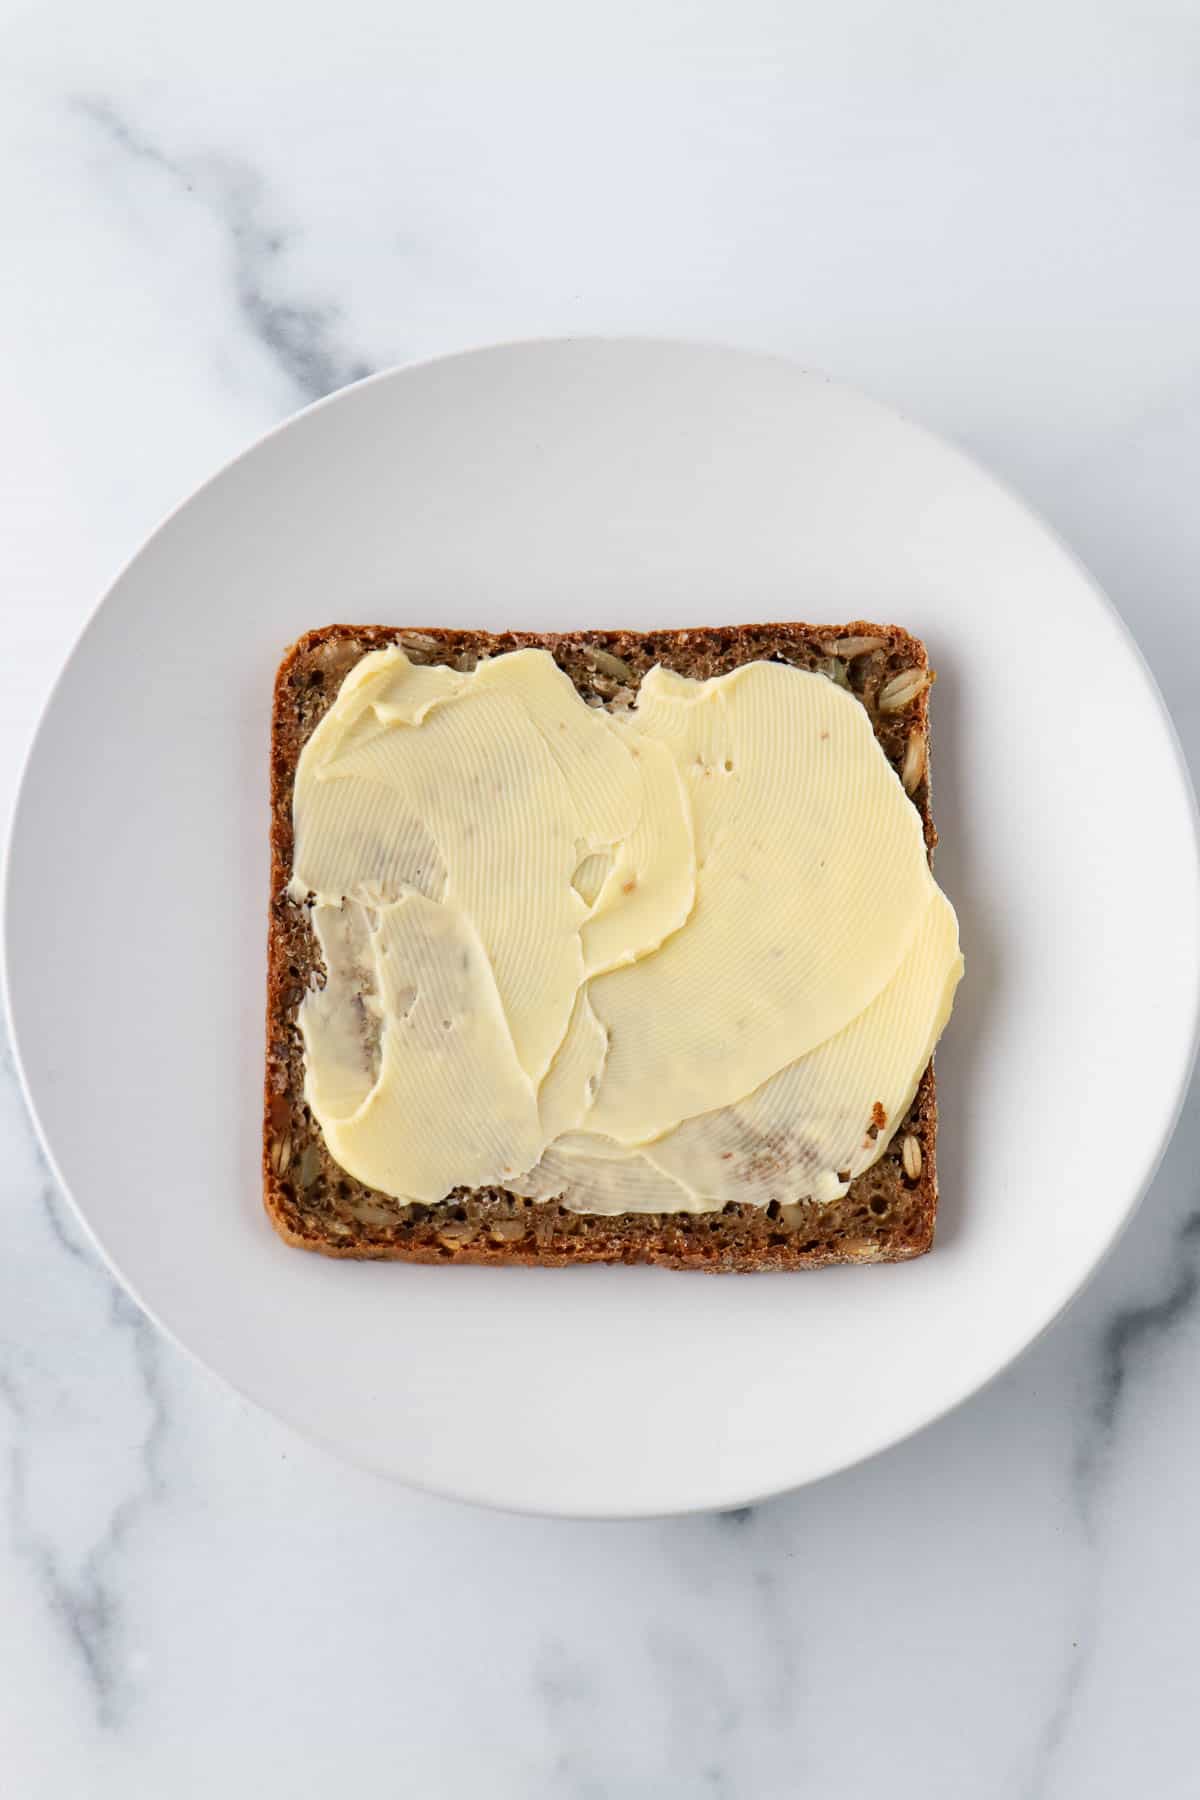 Buttered piece of rye bread on a white plate.